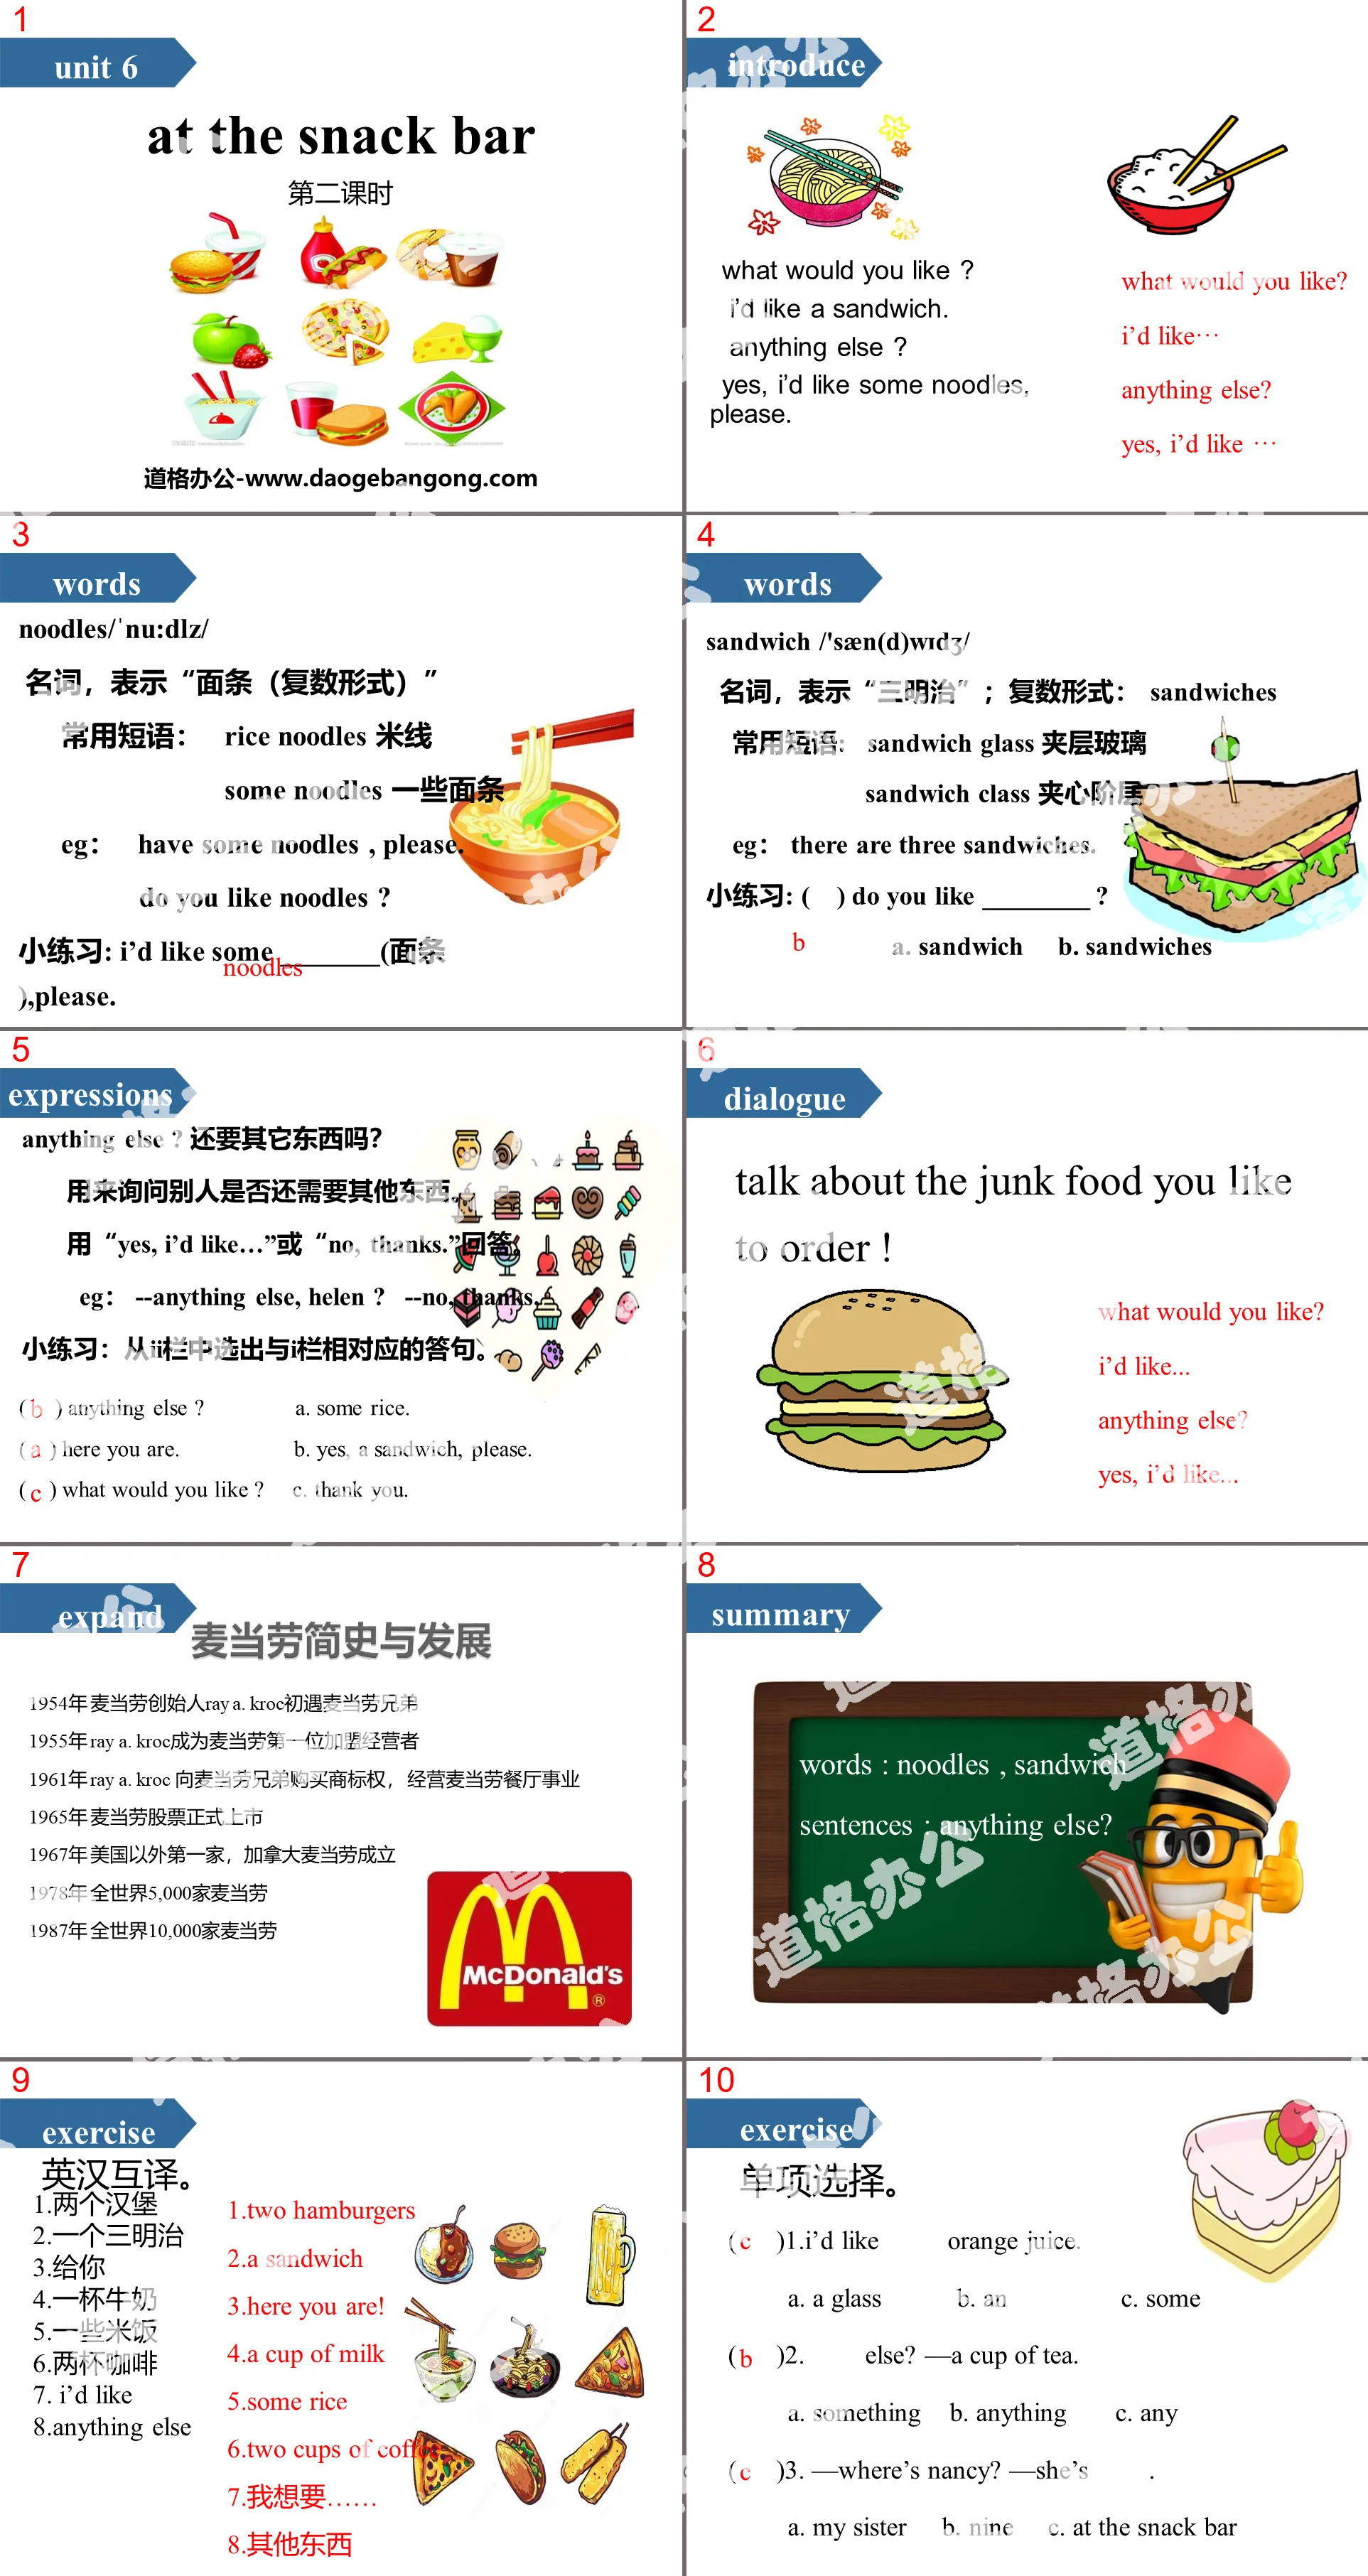 《At the snack bar》PPT(第二课时)
